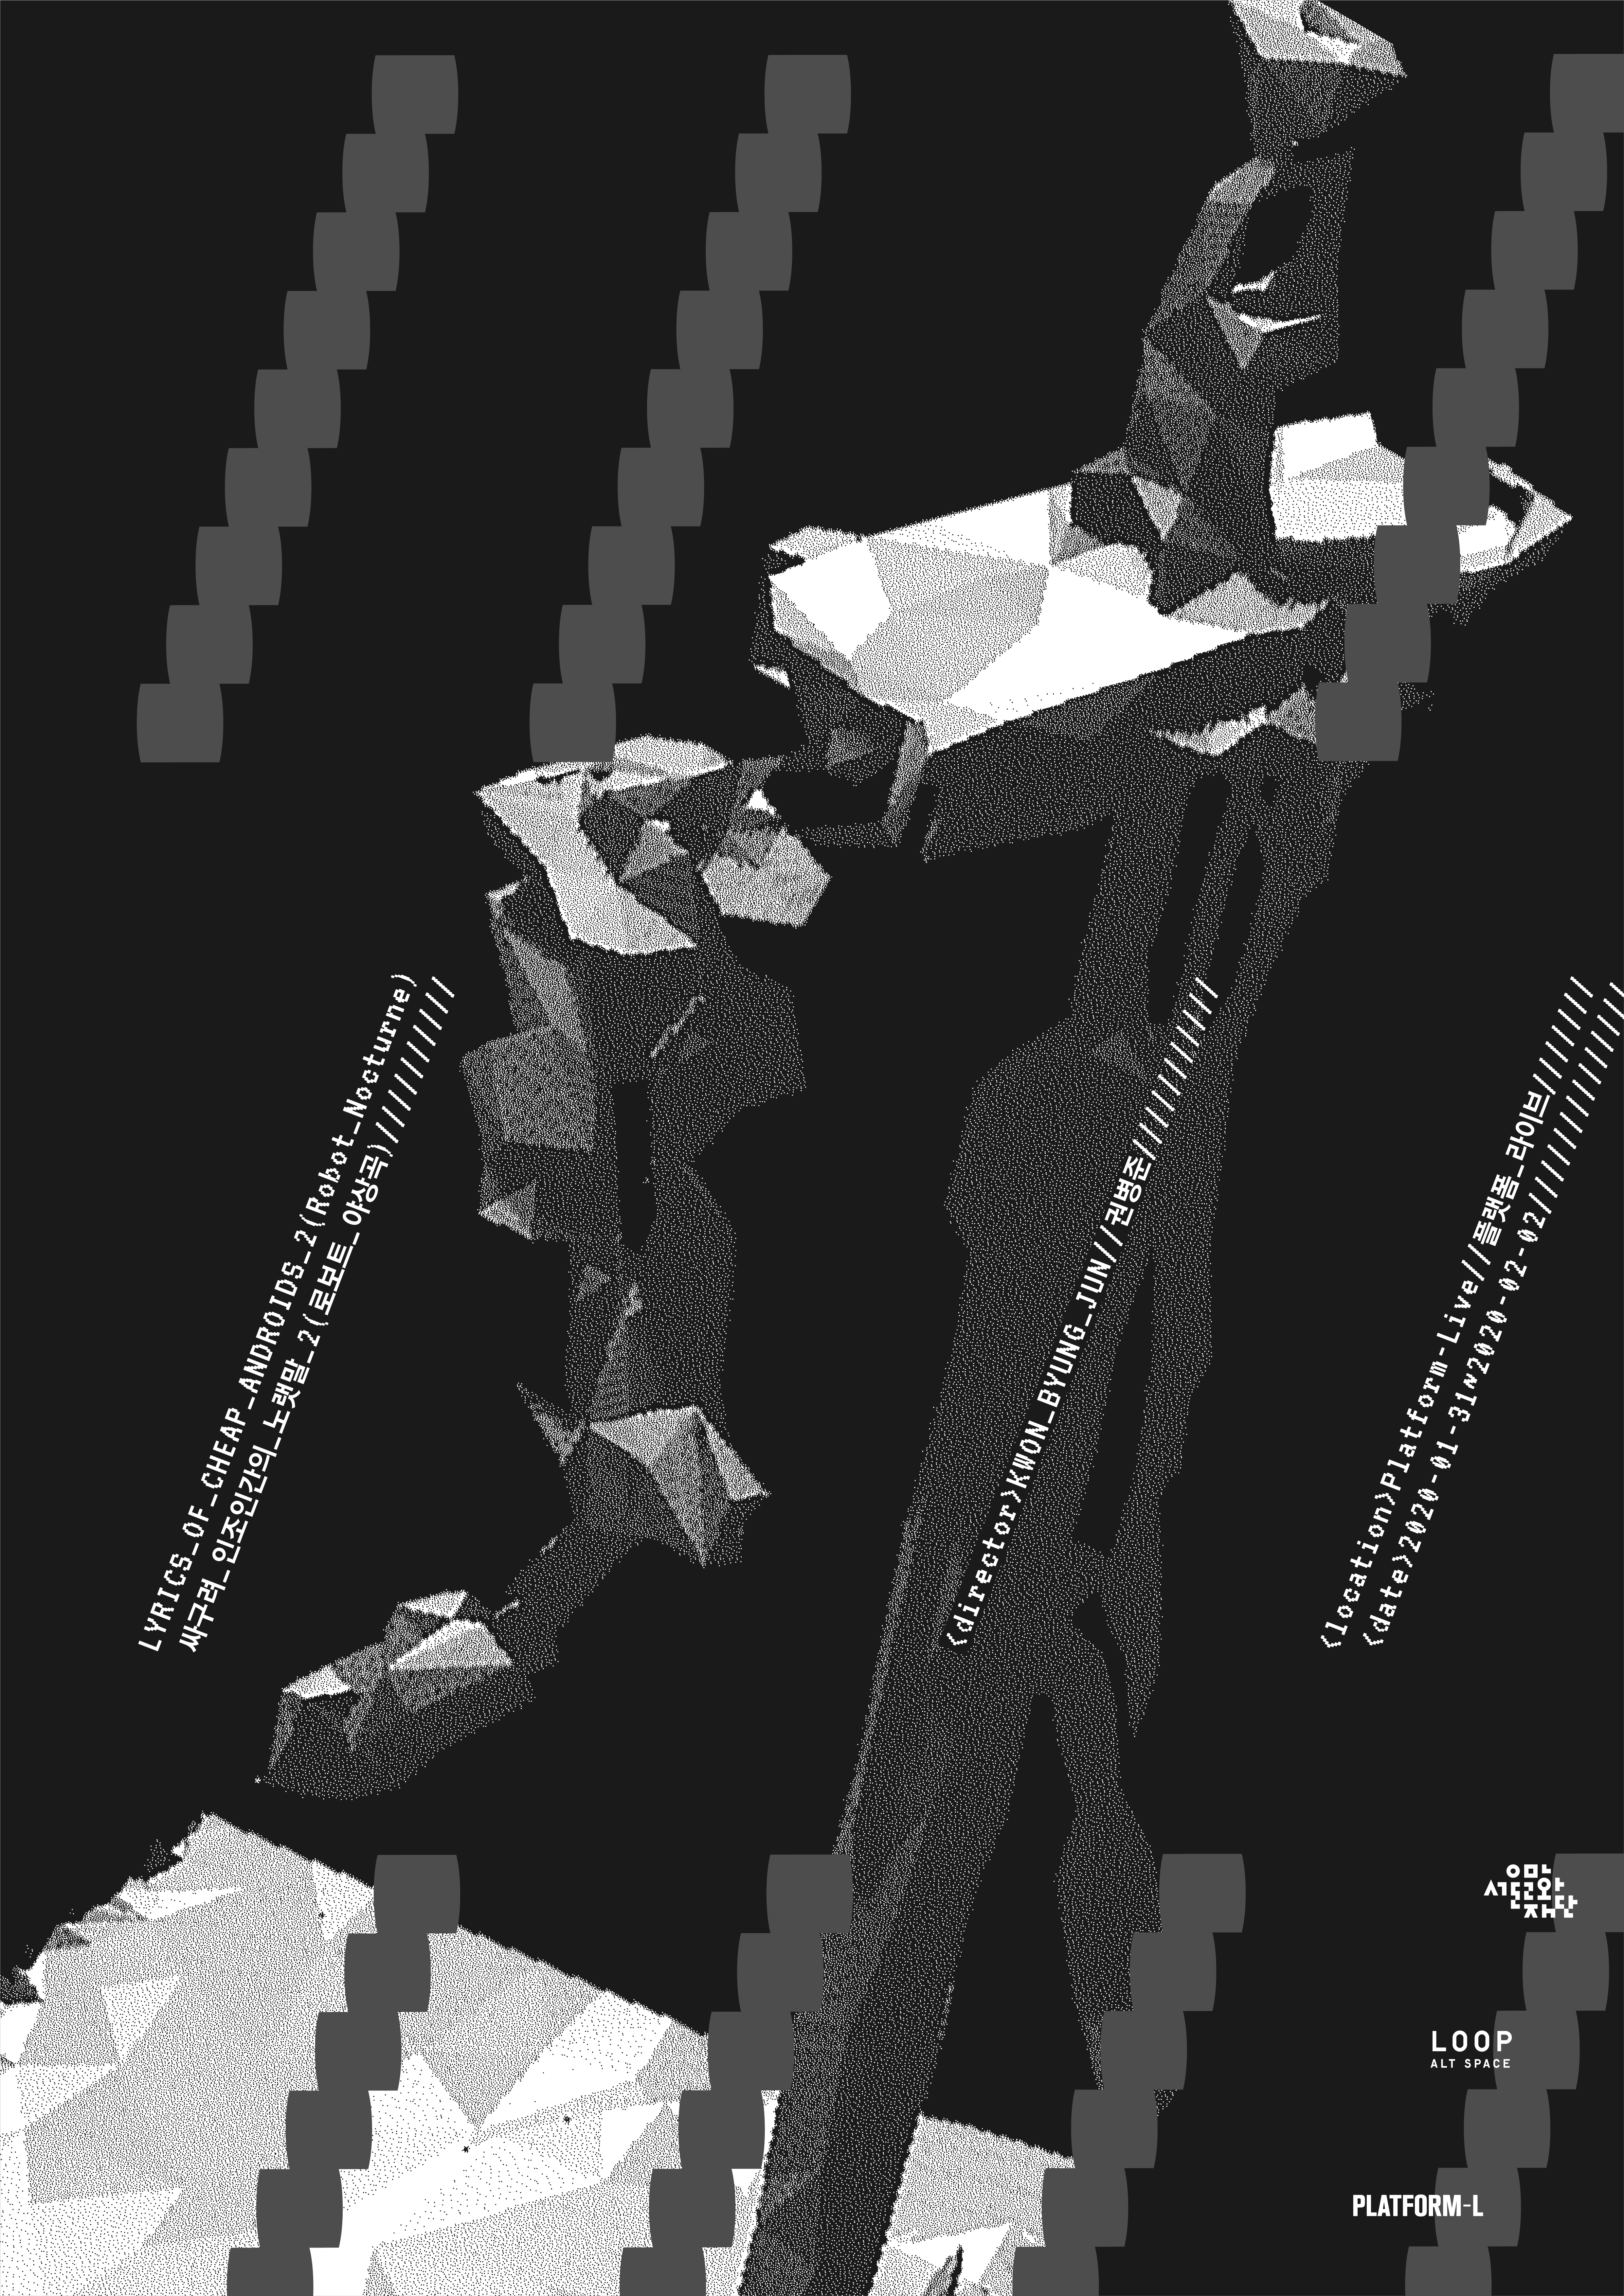 Lyrics of Cheap Androids 2 (Robot Nocturne)